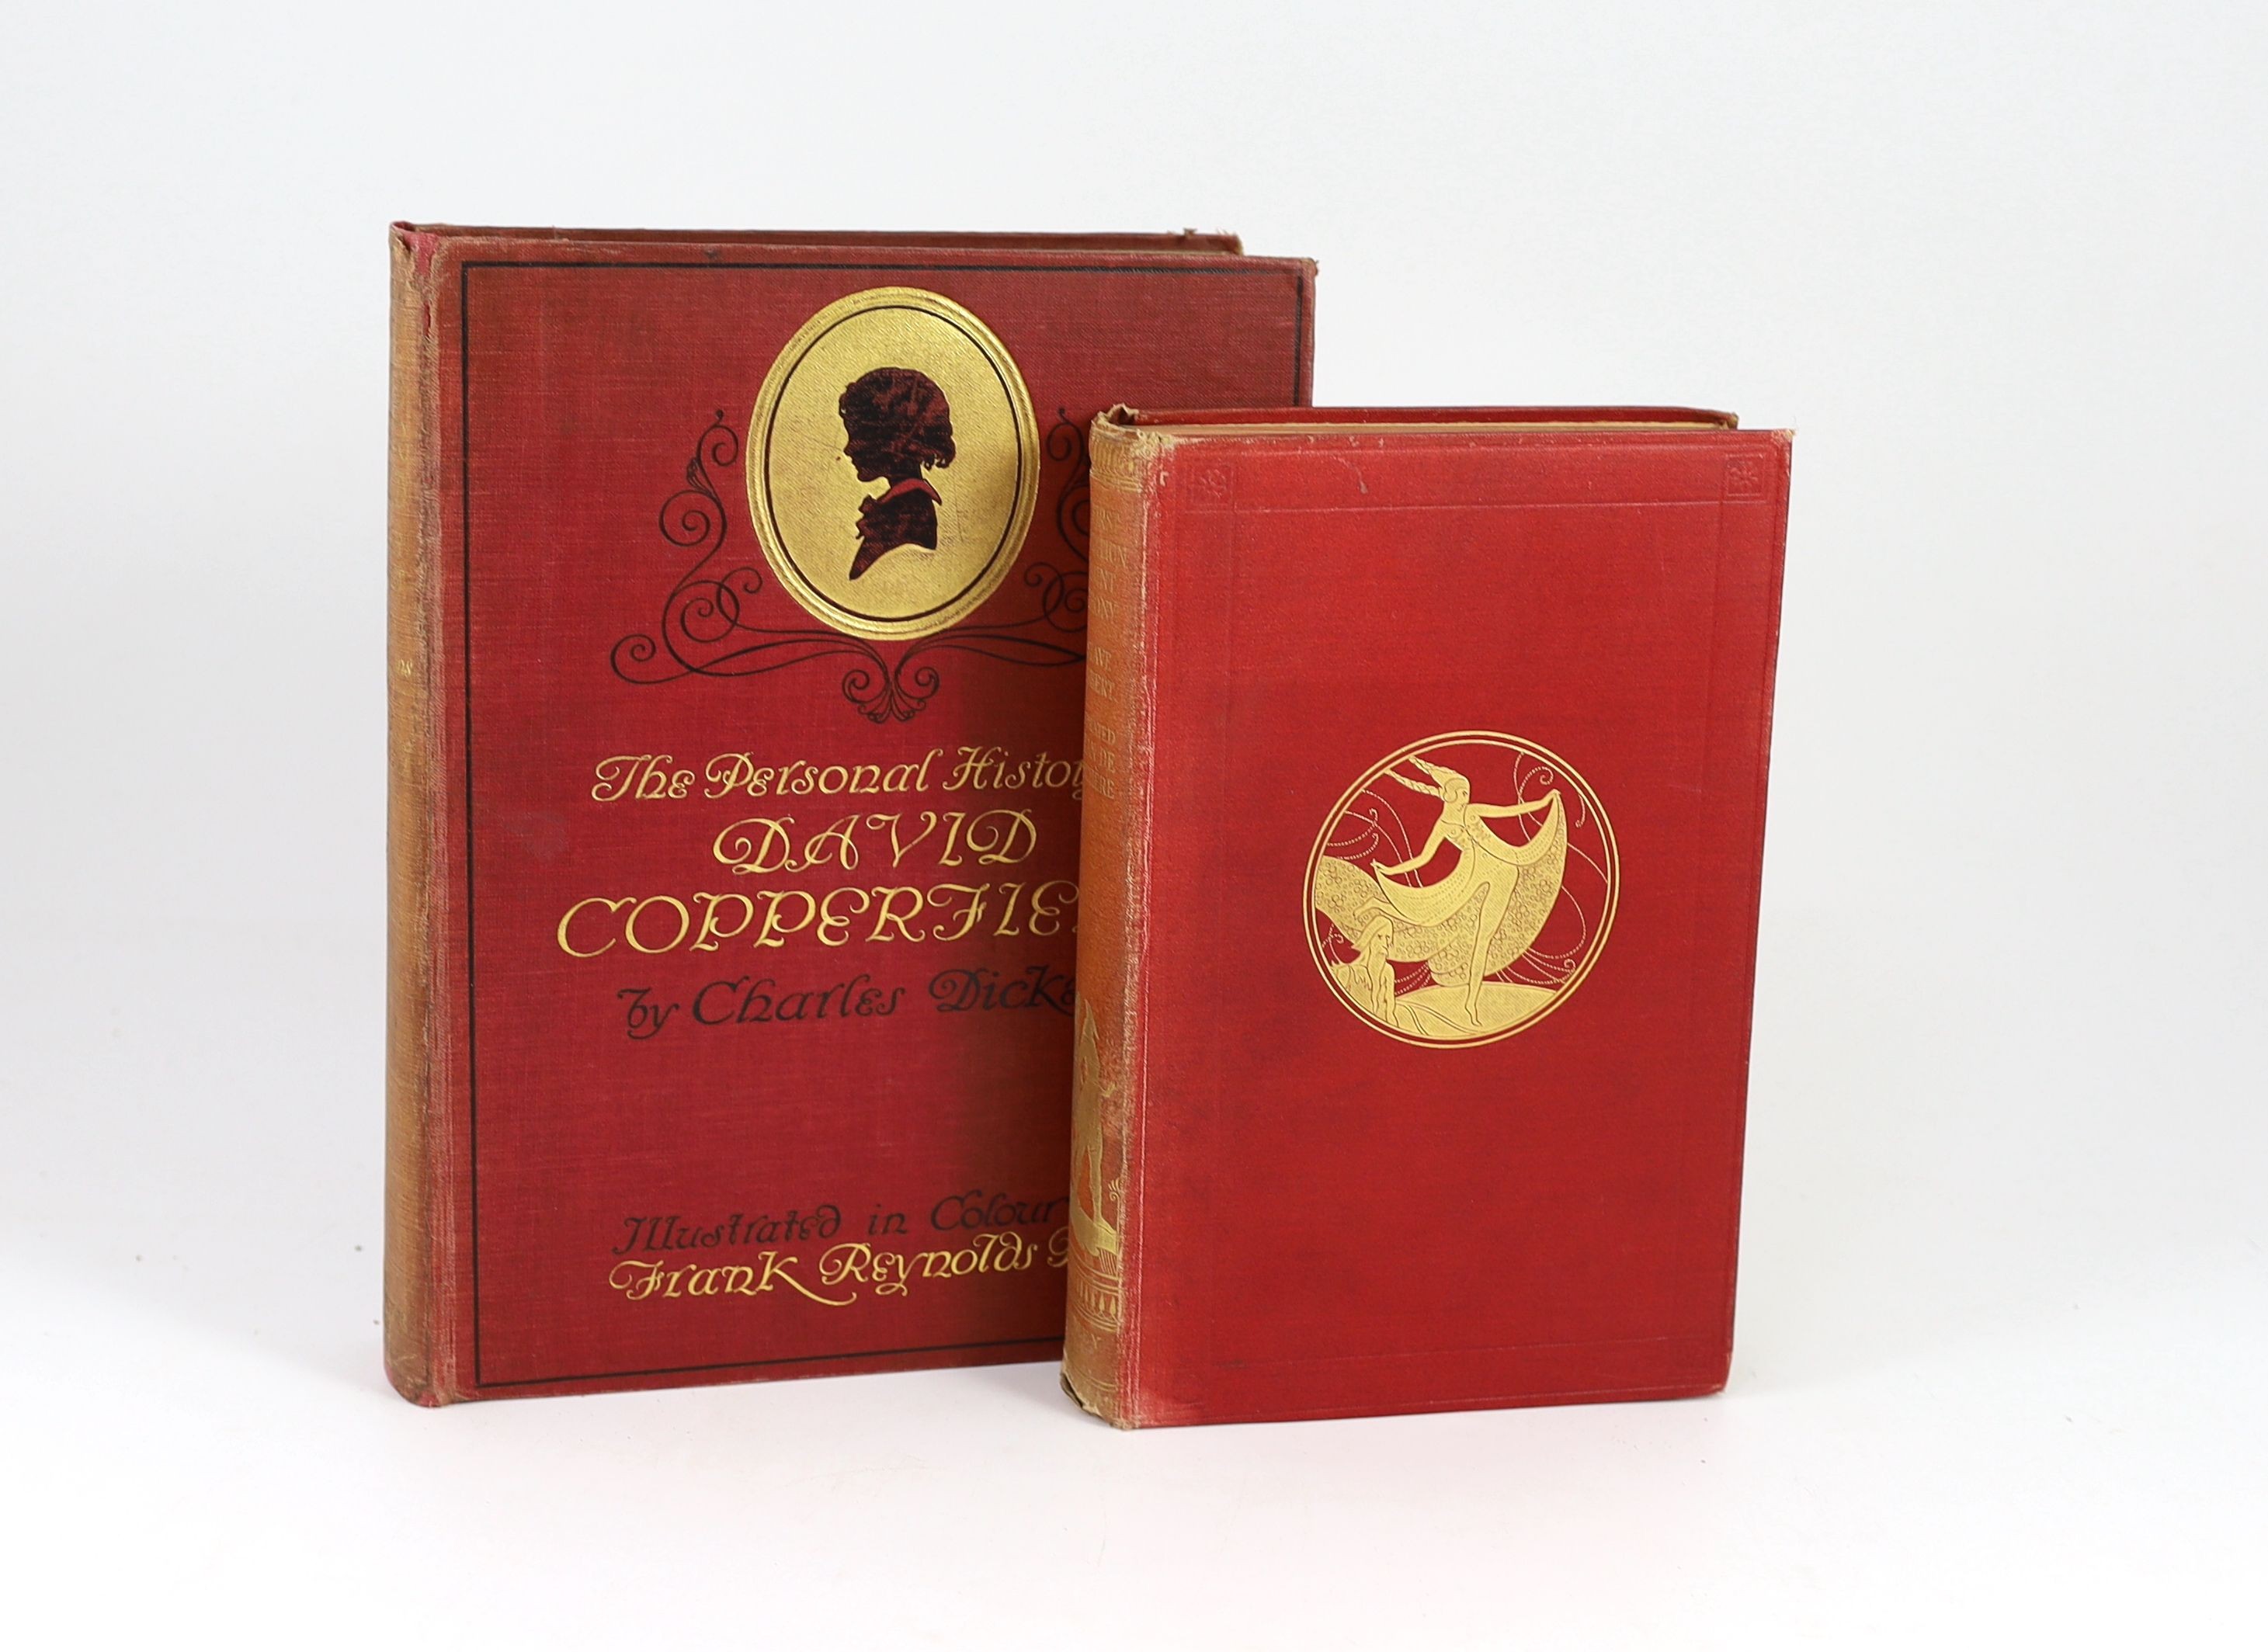 Dickens, Charles - The Personal History of David Copperfield, illustrated with 20 tipped-in colour plates by Frank Reynolds, 4to, original red buckram with silhouette portrait, Westminster Press, London, c. 1911 and Flau